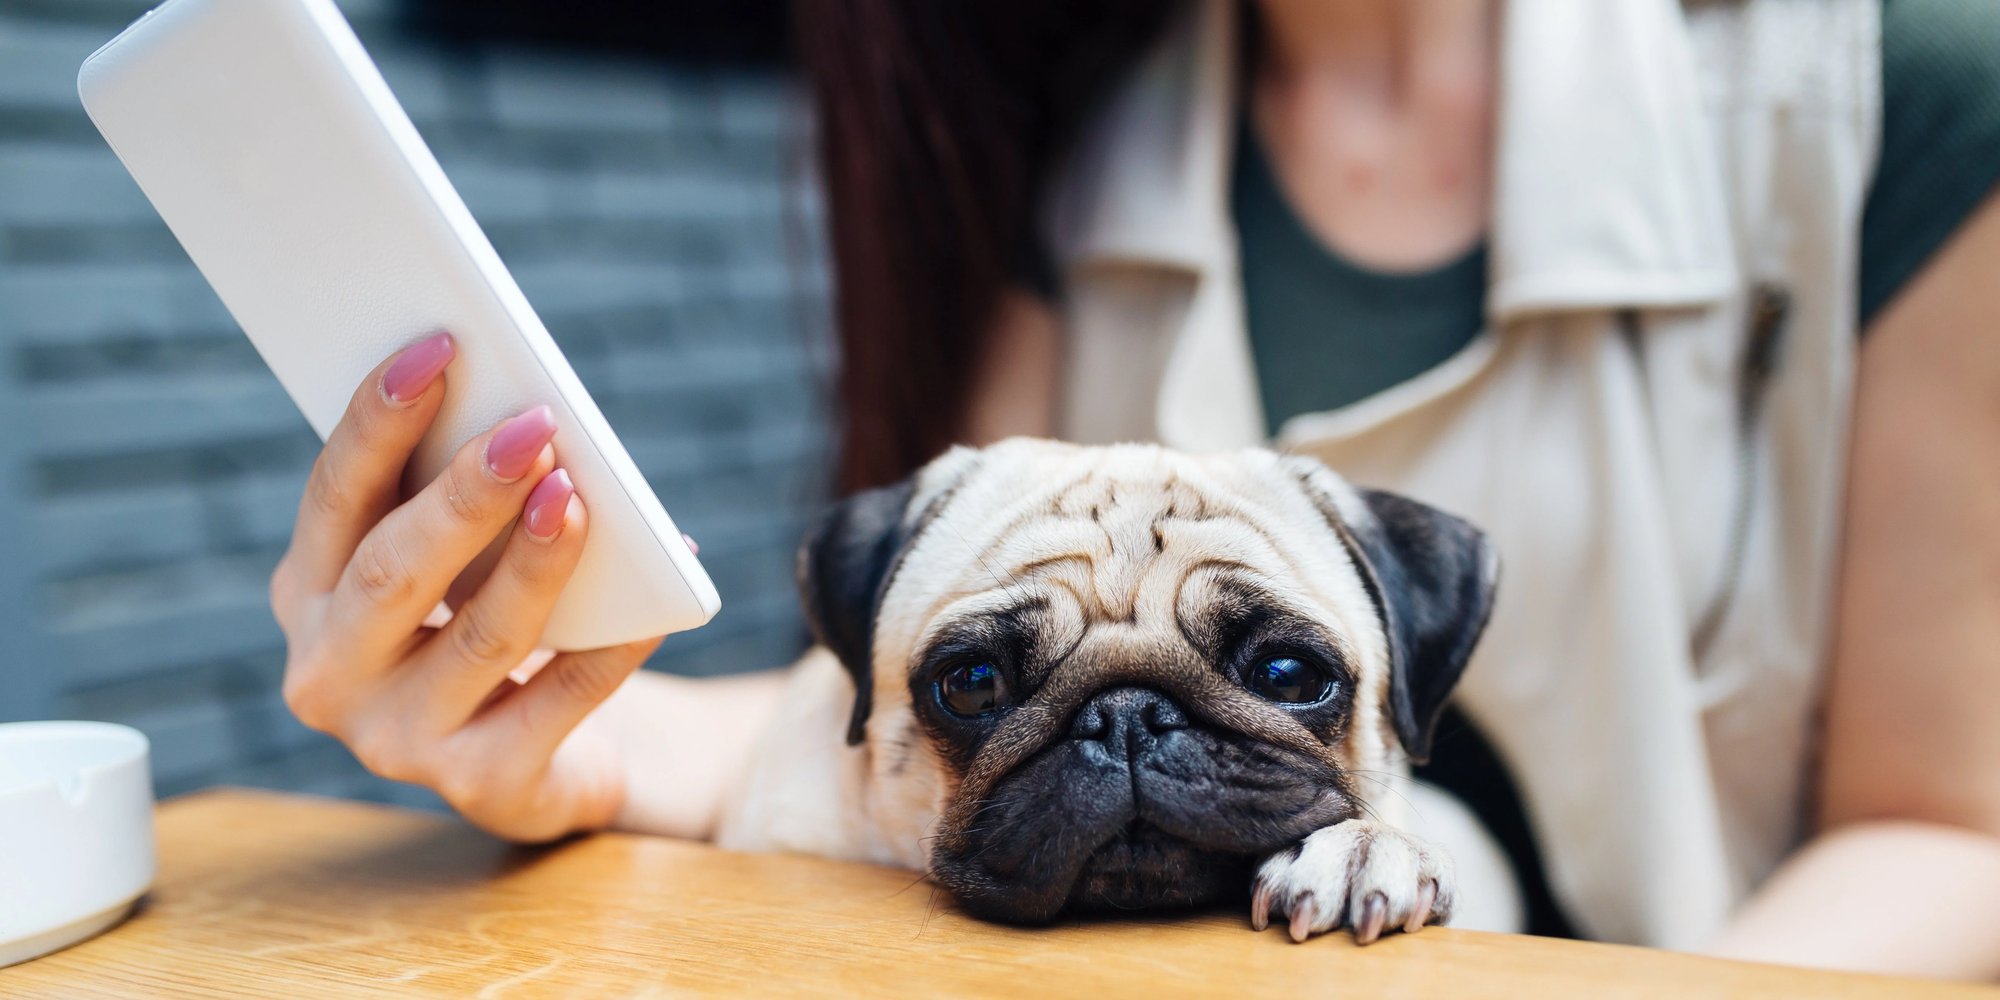 Optimizing the OMNI in Omnichannel with Mars Petcare